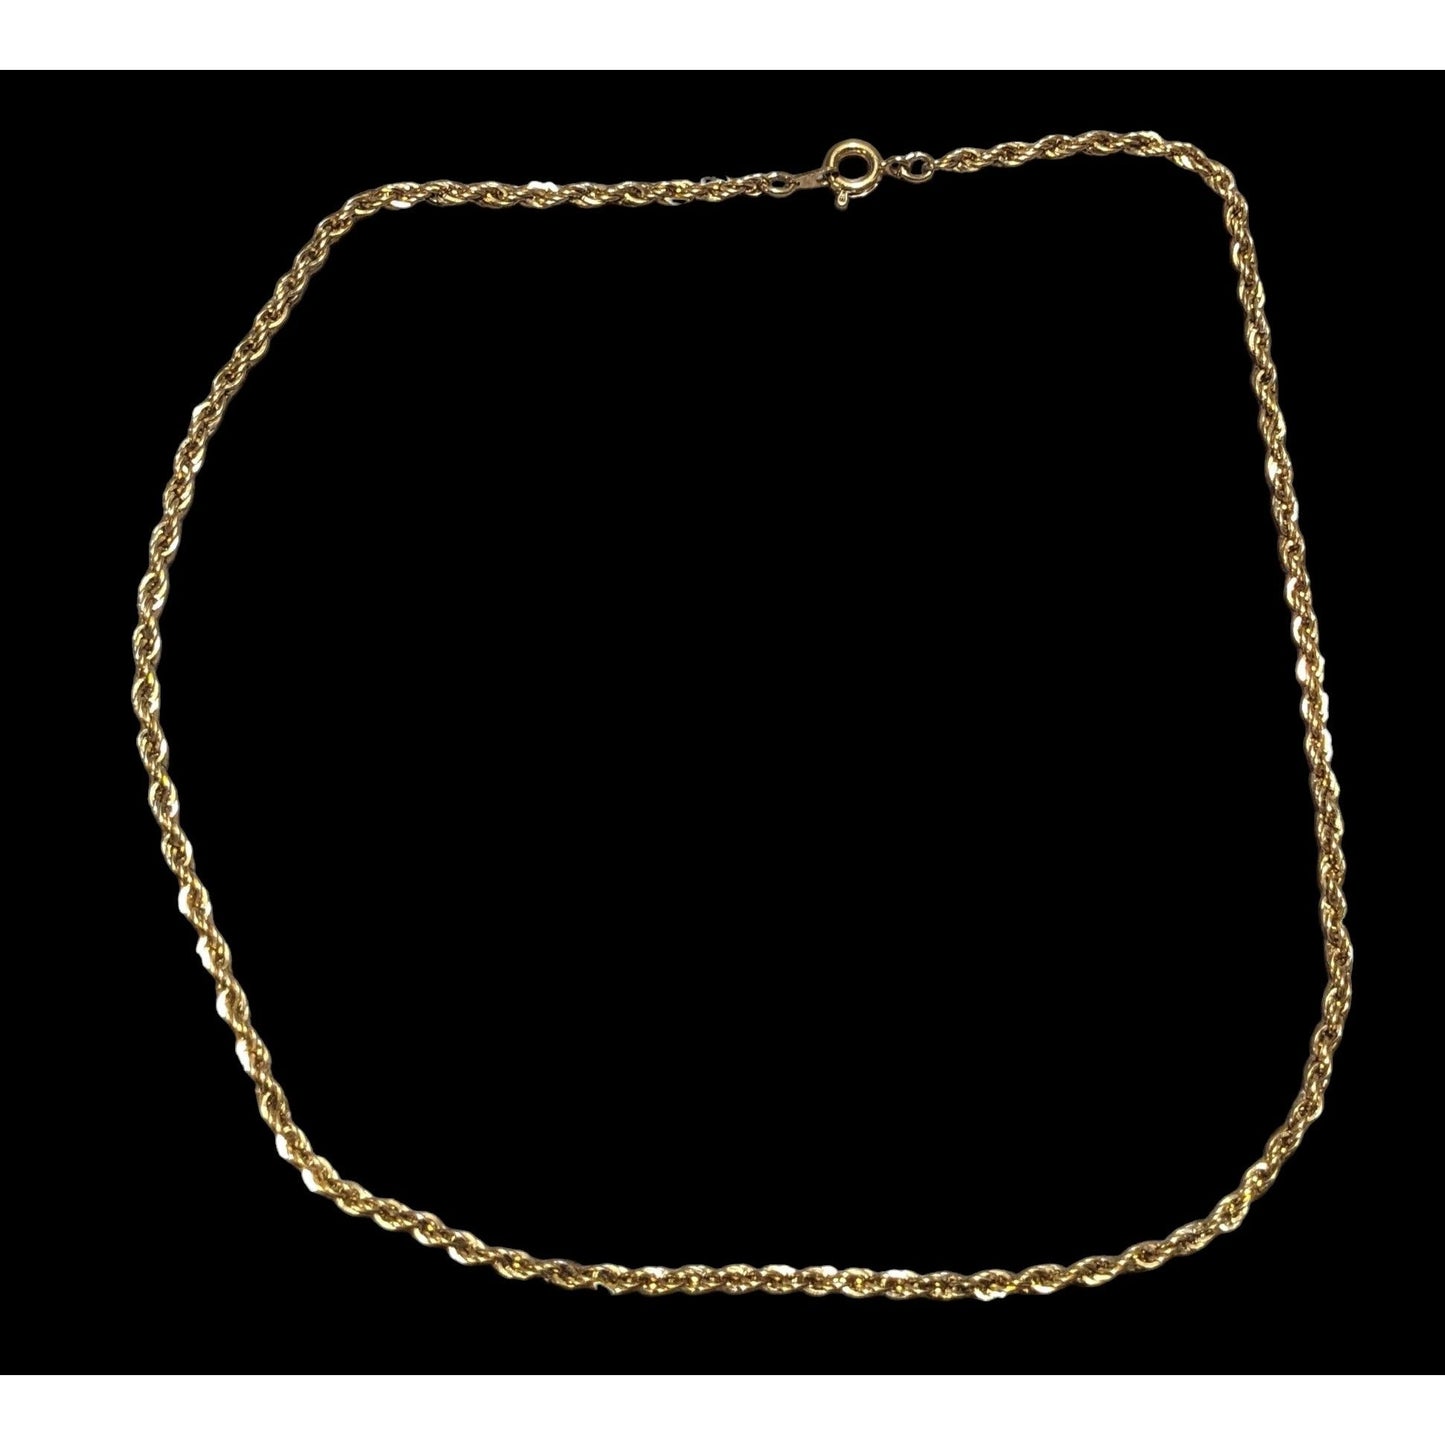 Bright Gold Rope Chain Necklace